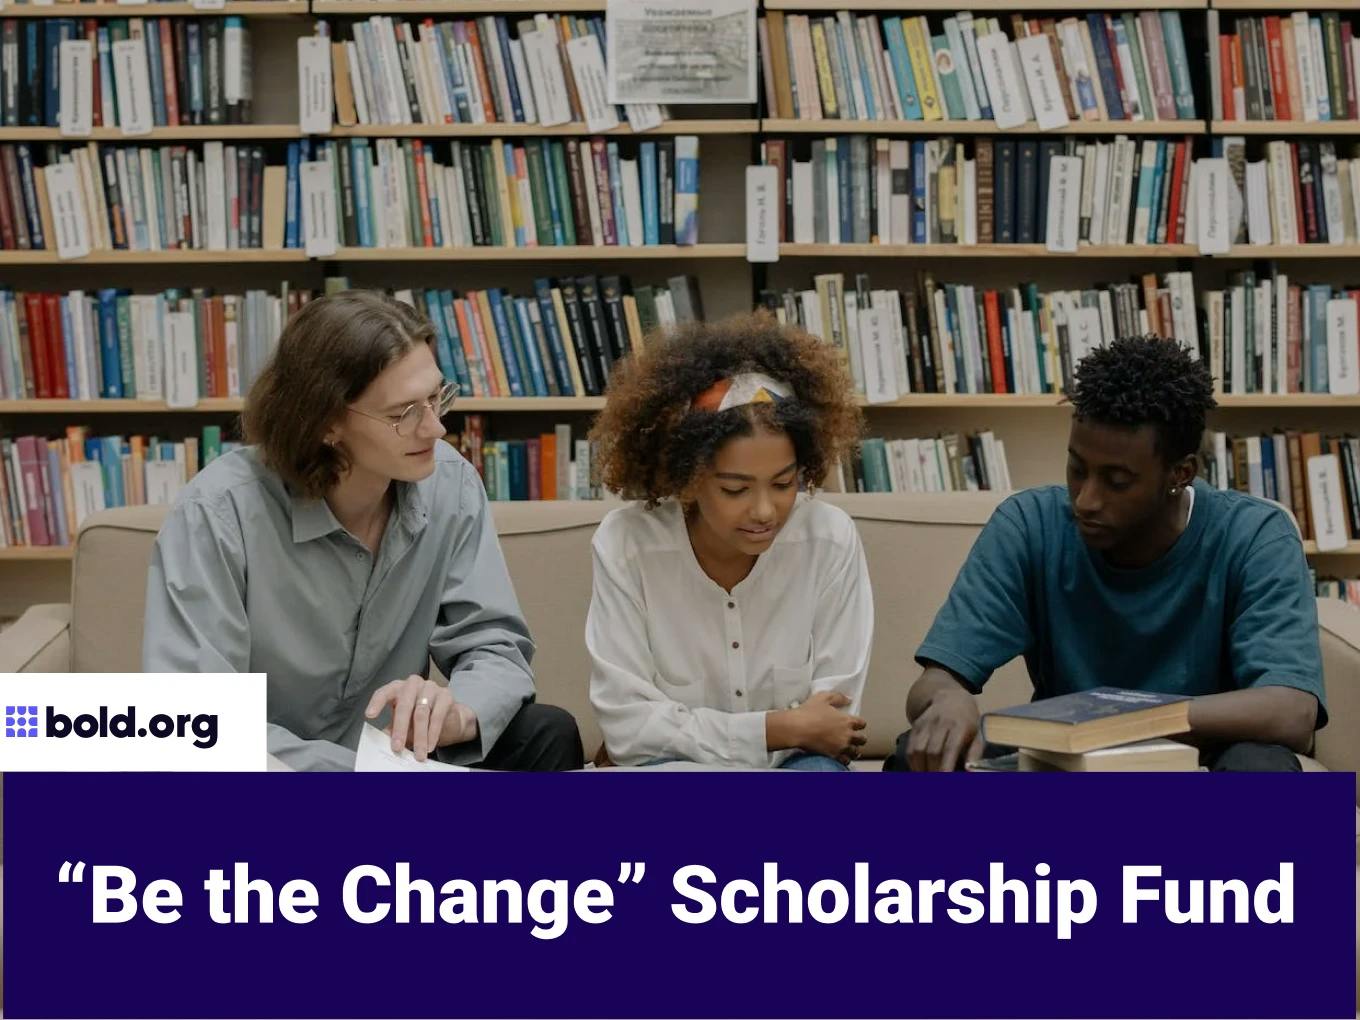 “Be the Change” Scholarship Fund